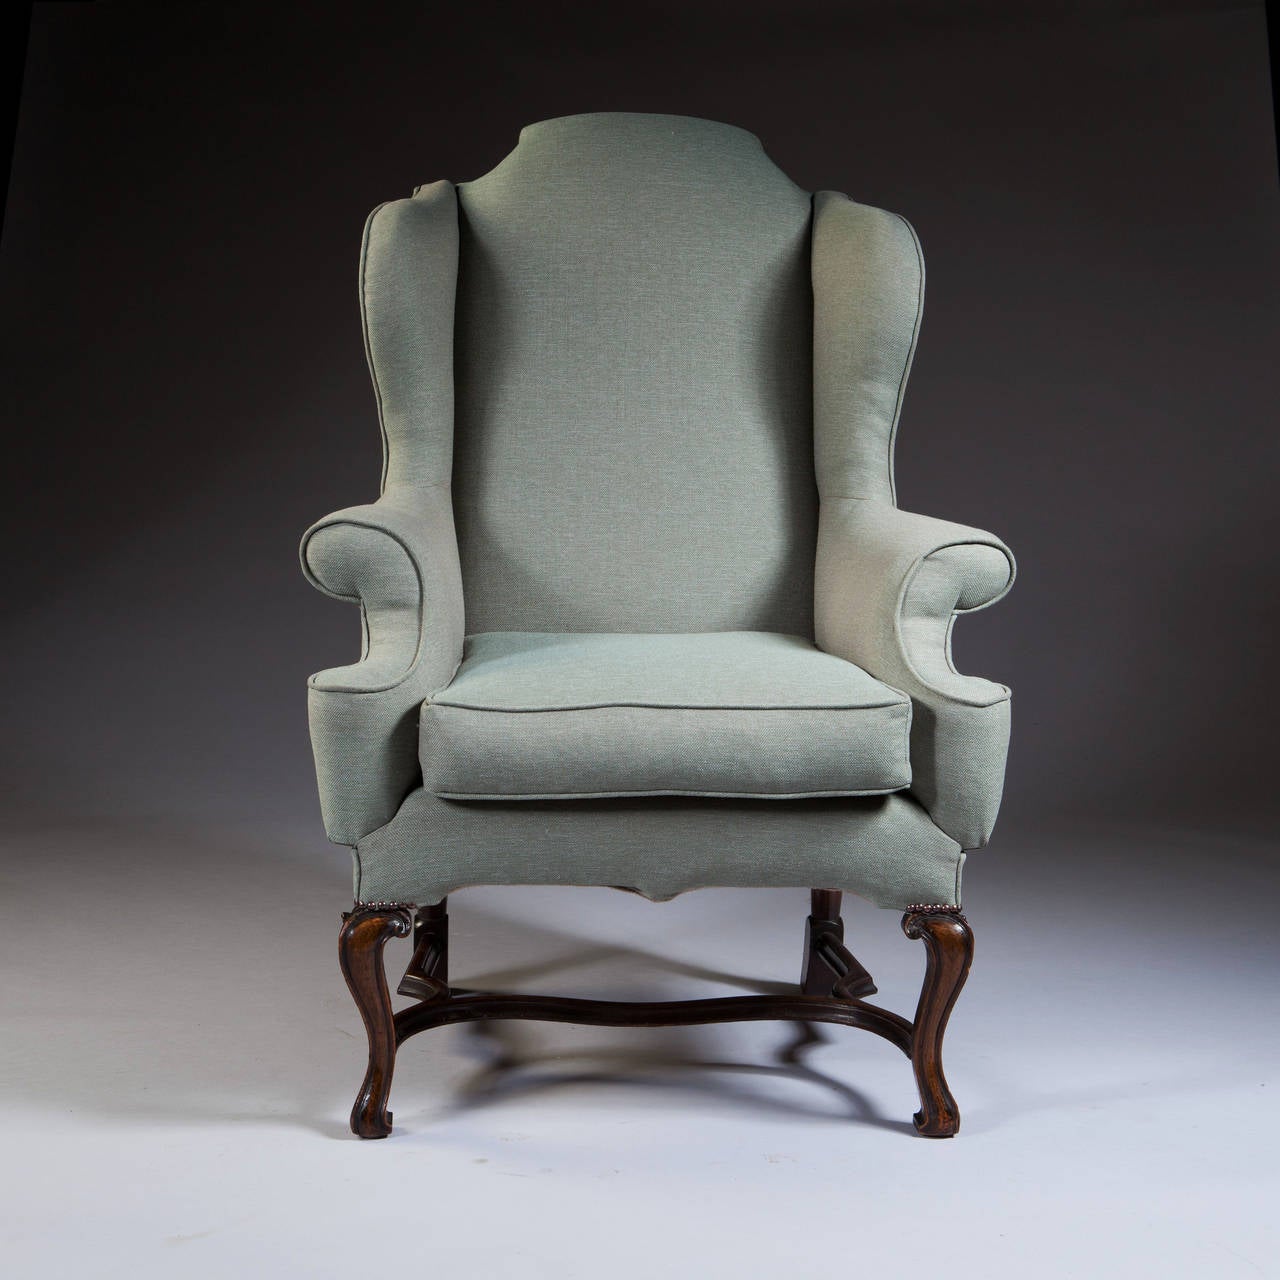 An elegant and good sized George I style wing chair, raised on cabriole legs with scroll toes and an interesting carved stretcher.